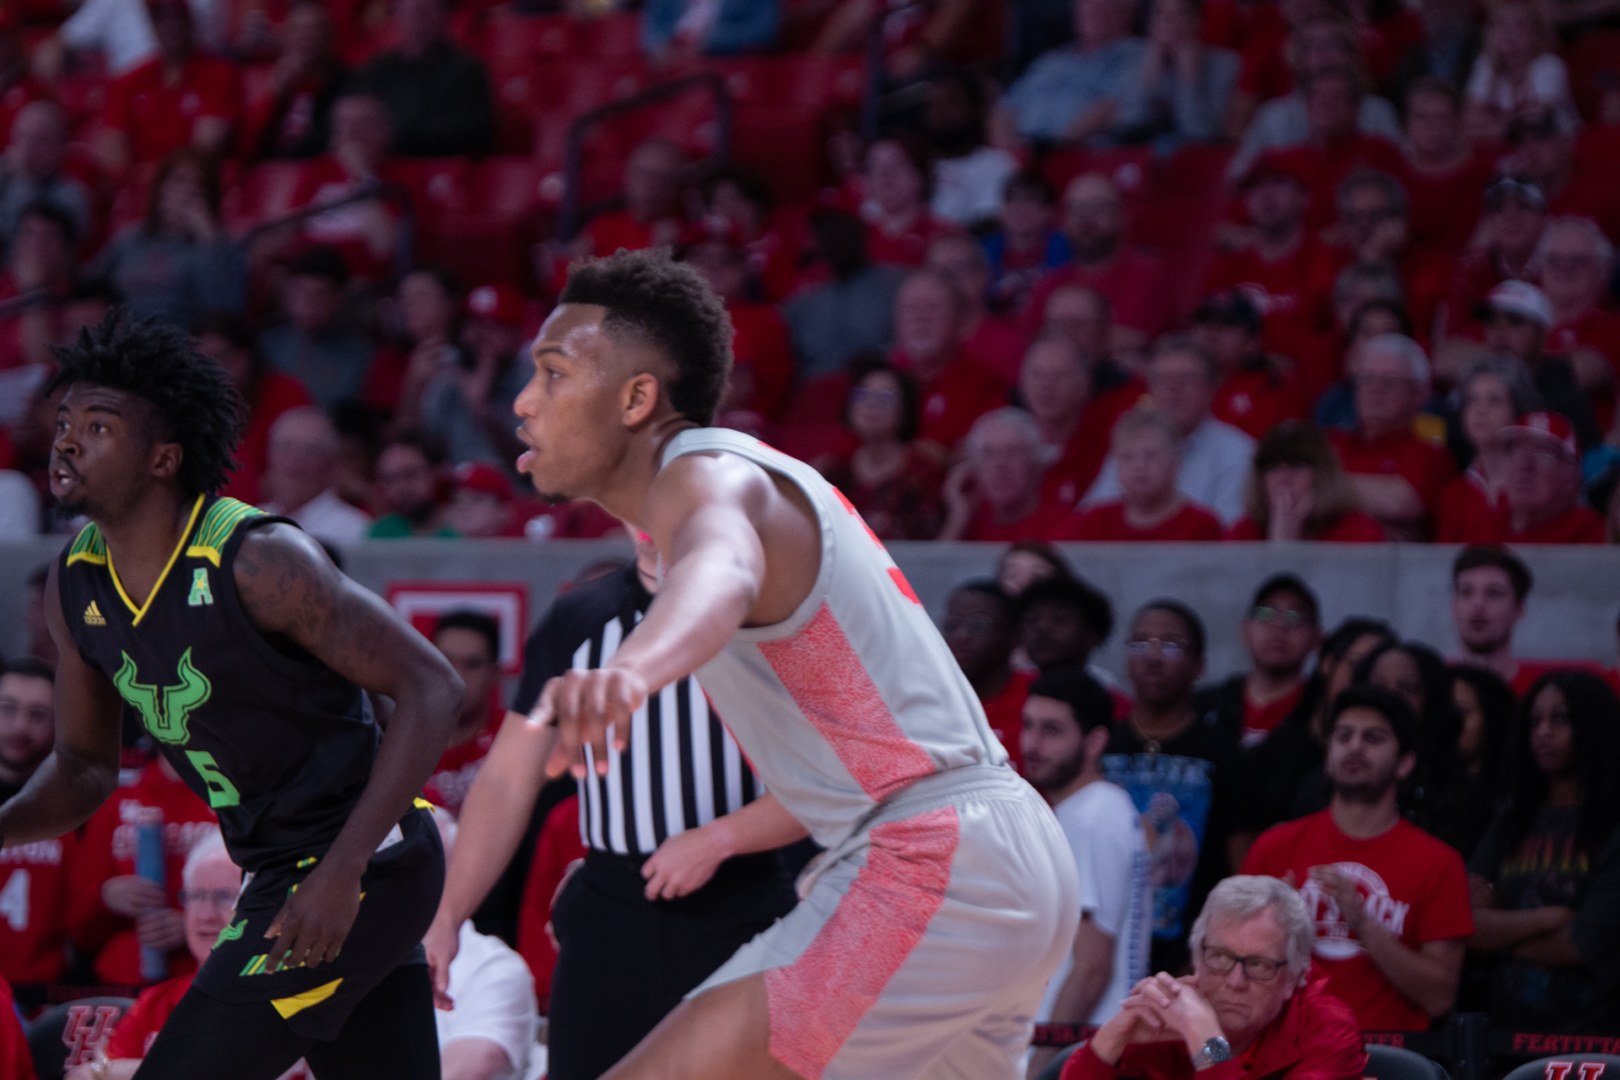 Junior forward Fabian White Jr. had 11 points and three rebounds in Houston's 68-49 win over the Bulls on Sunday afternoon at the Fertitta Center. | Kathryn Lenihan/The Cougar